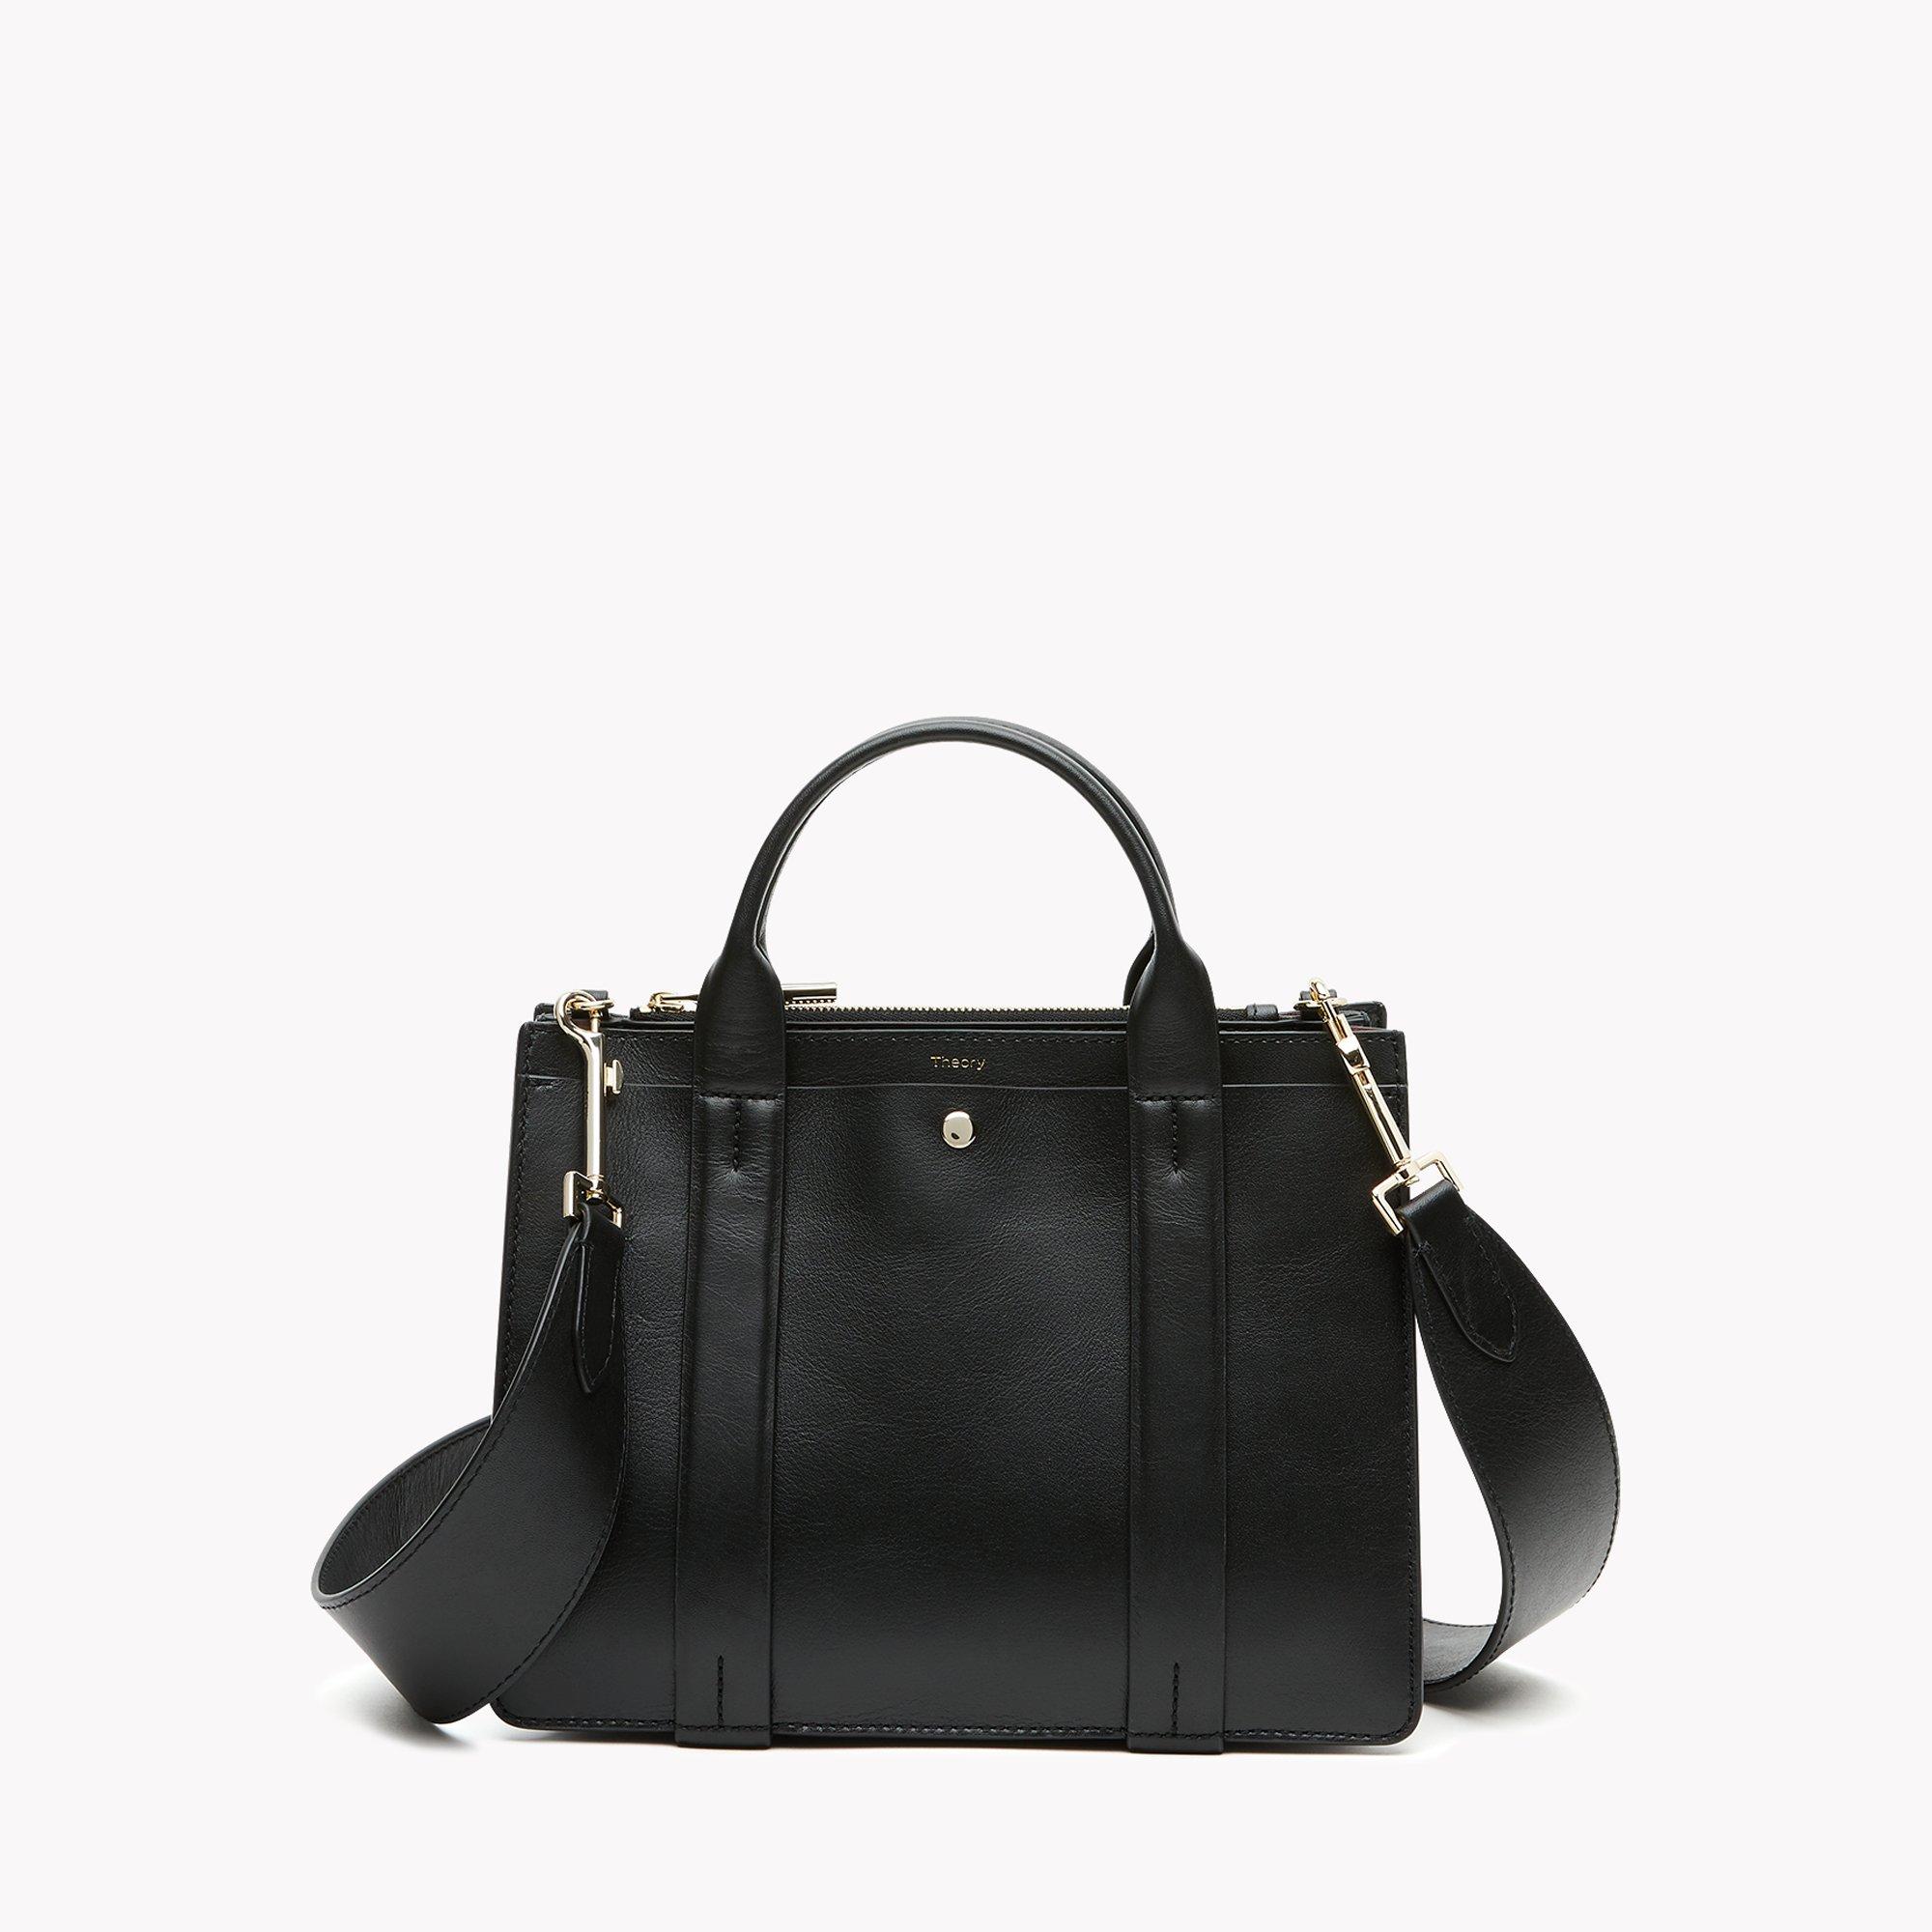 West Mini Satchel Bag in Leather